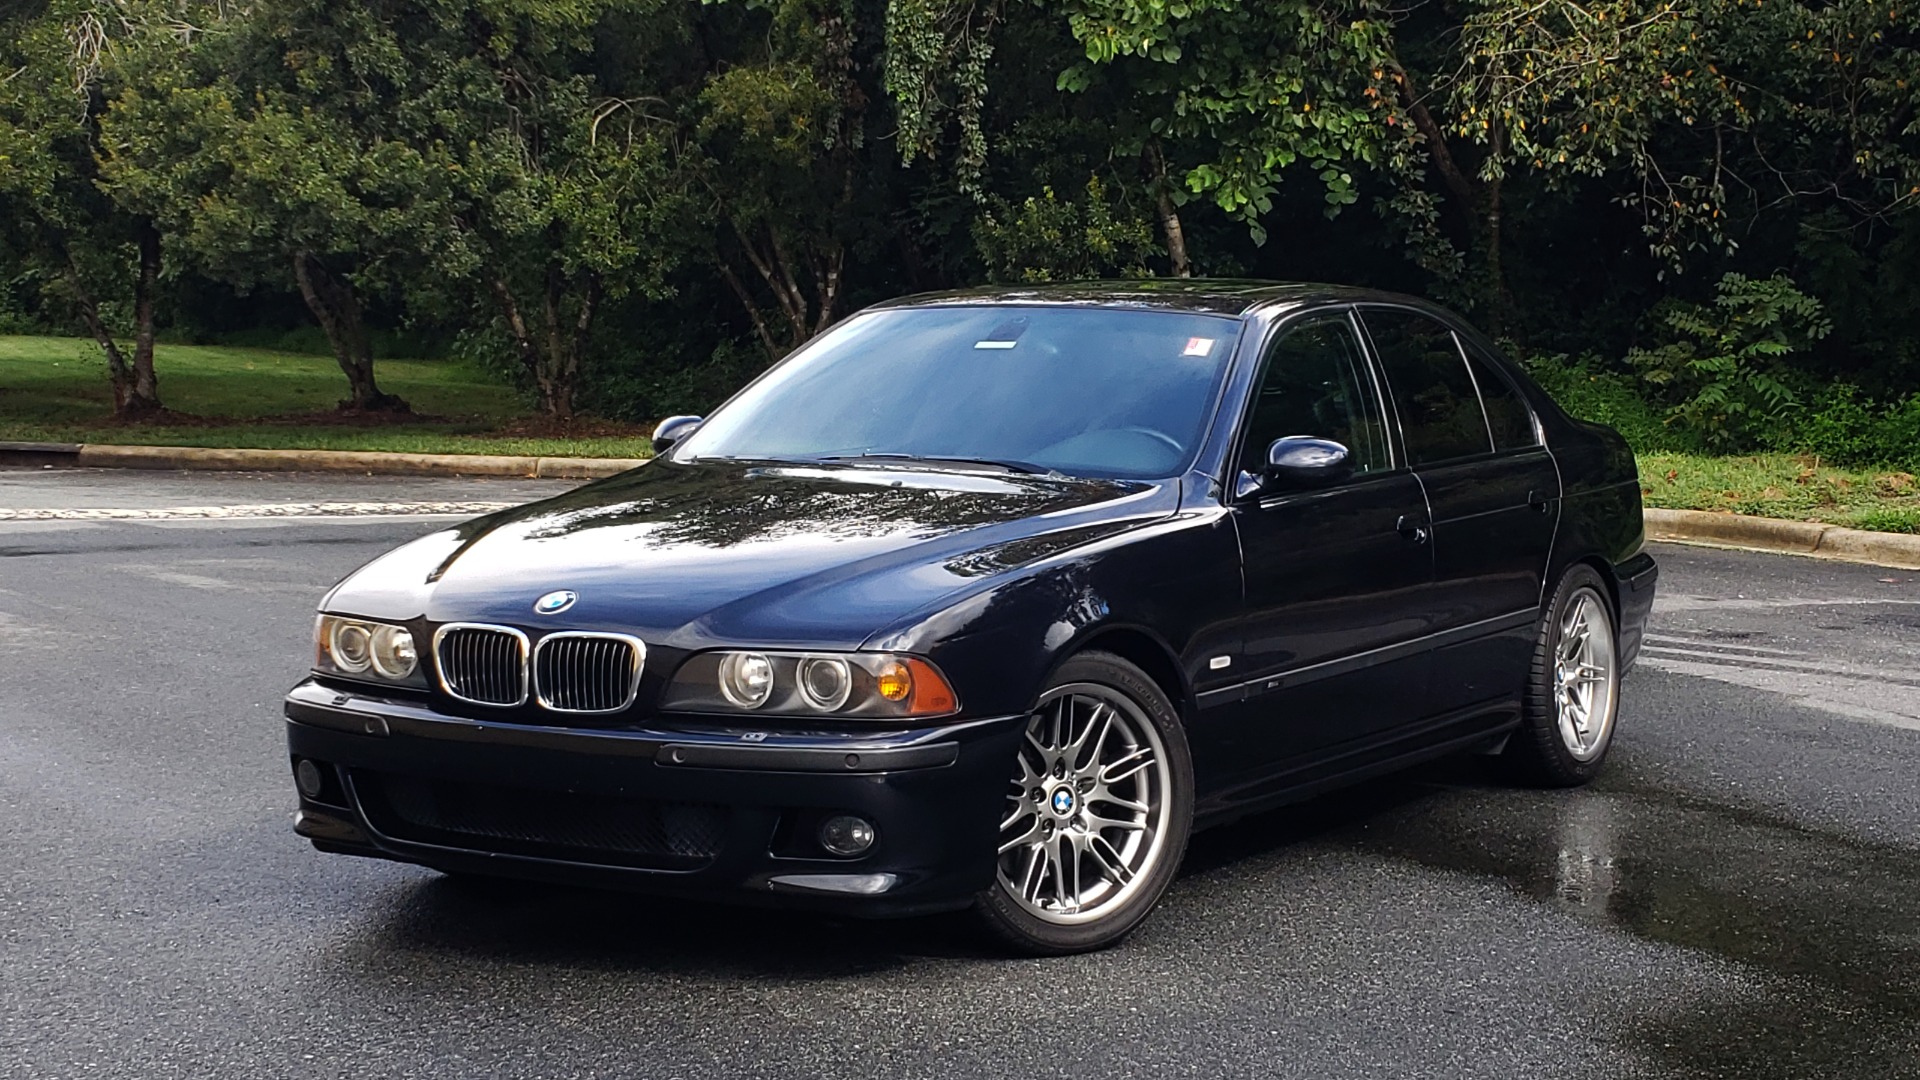 Used 2003 BMW 5 SERIES M5 / 6-SPD MAN / NAV / PARK DIST CNTRL / PREM SND / SUNROOF for sale Sold at Formula Imports in Charlotte NC 28227 1